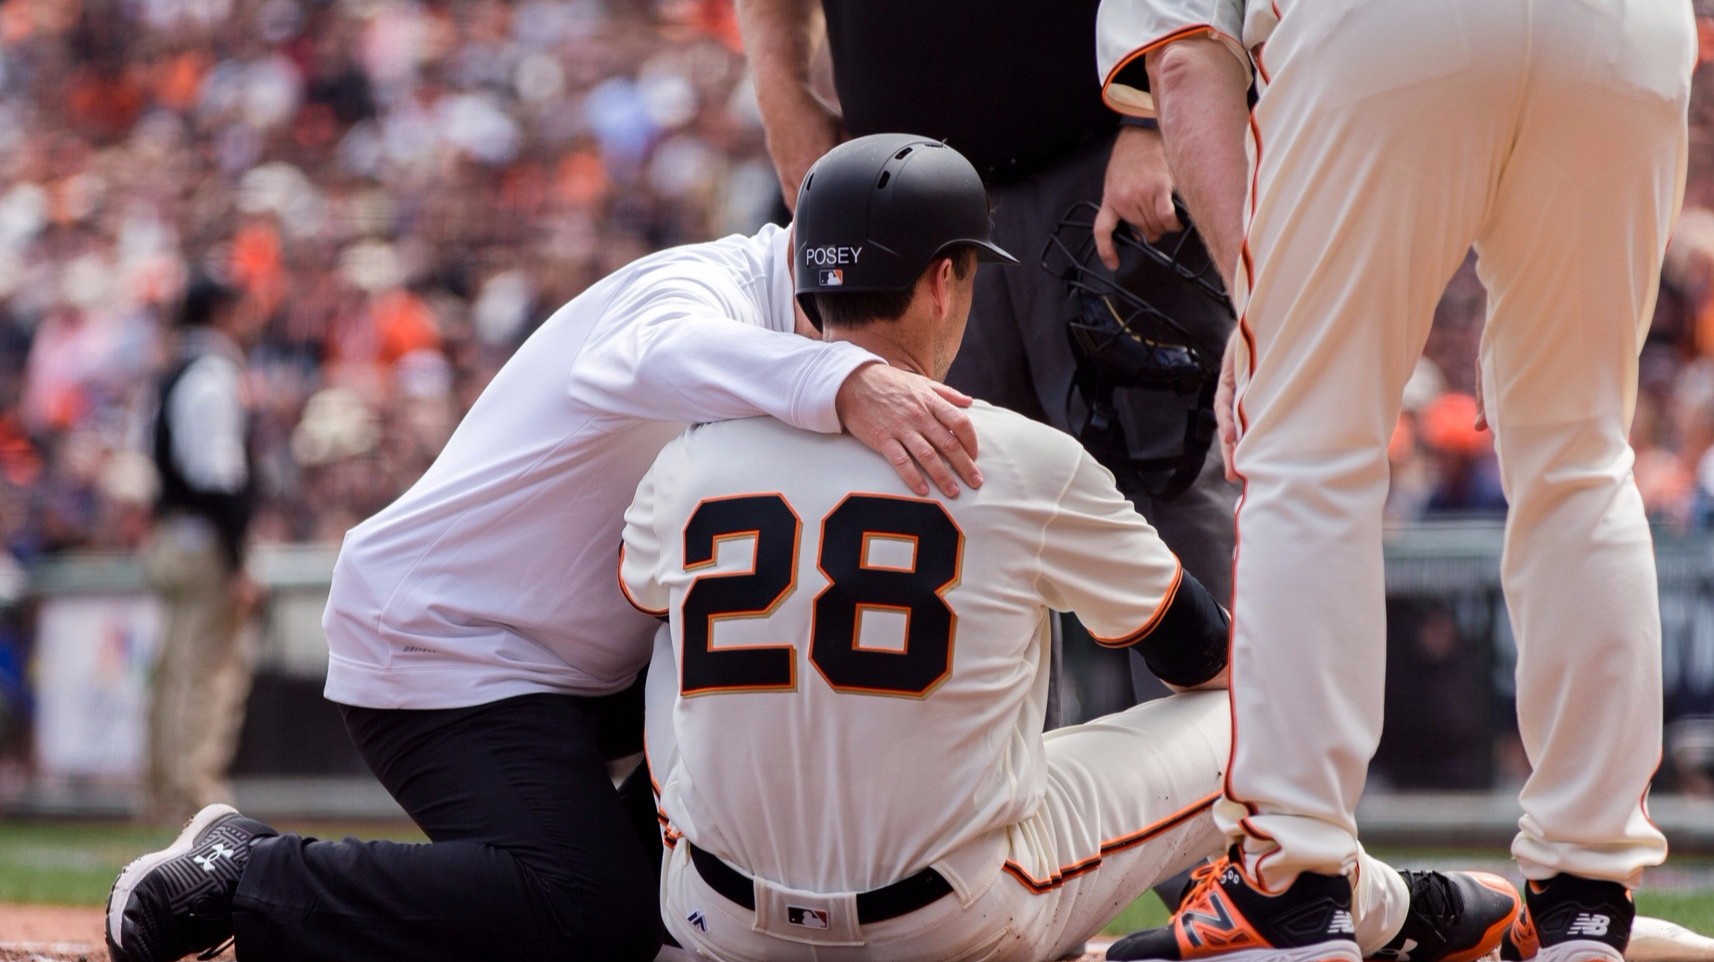 Giants' Buster Posey placed on seven-day concussion disabled list